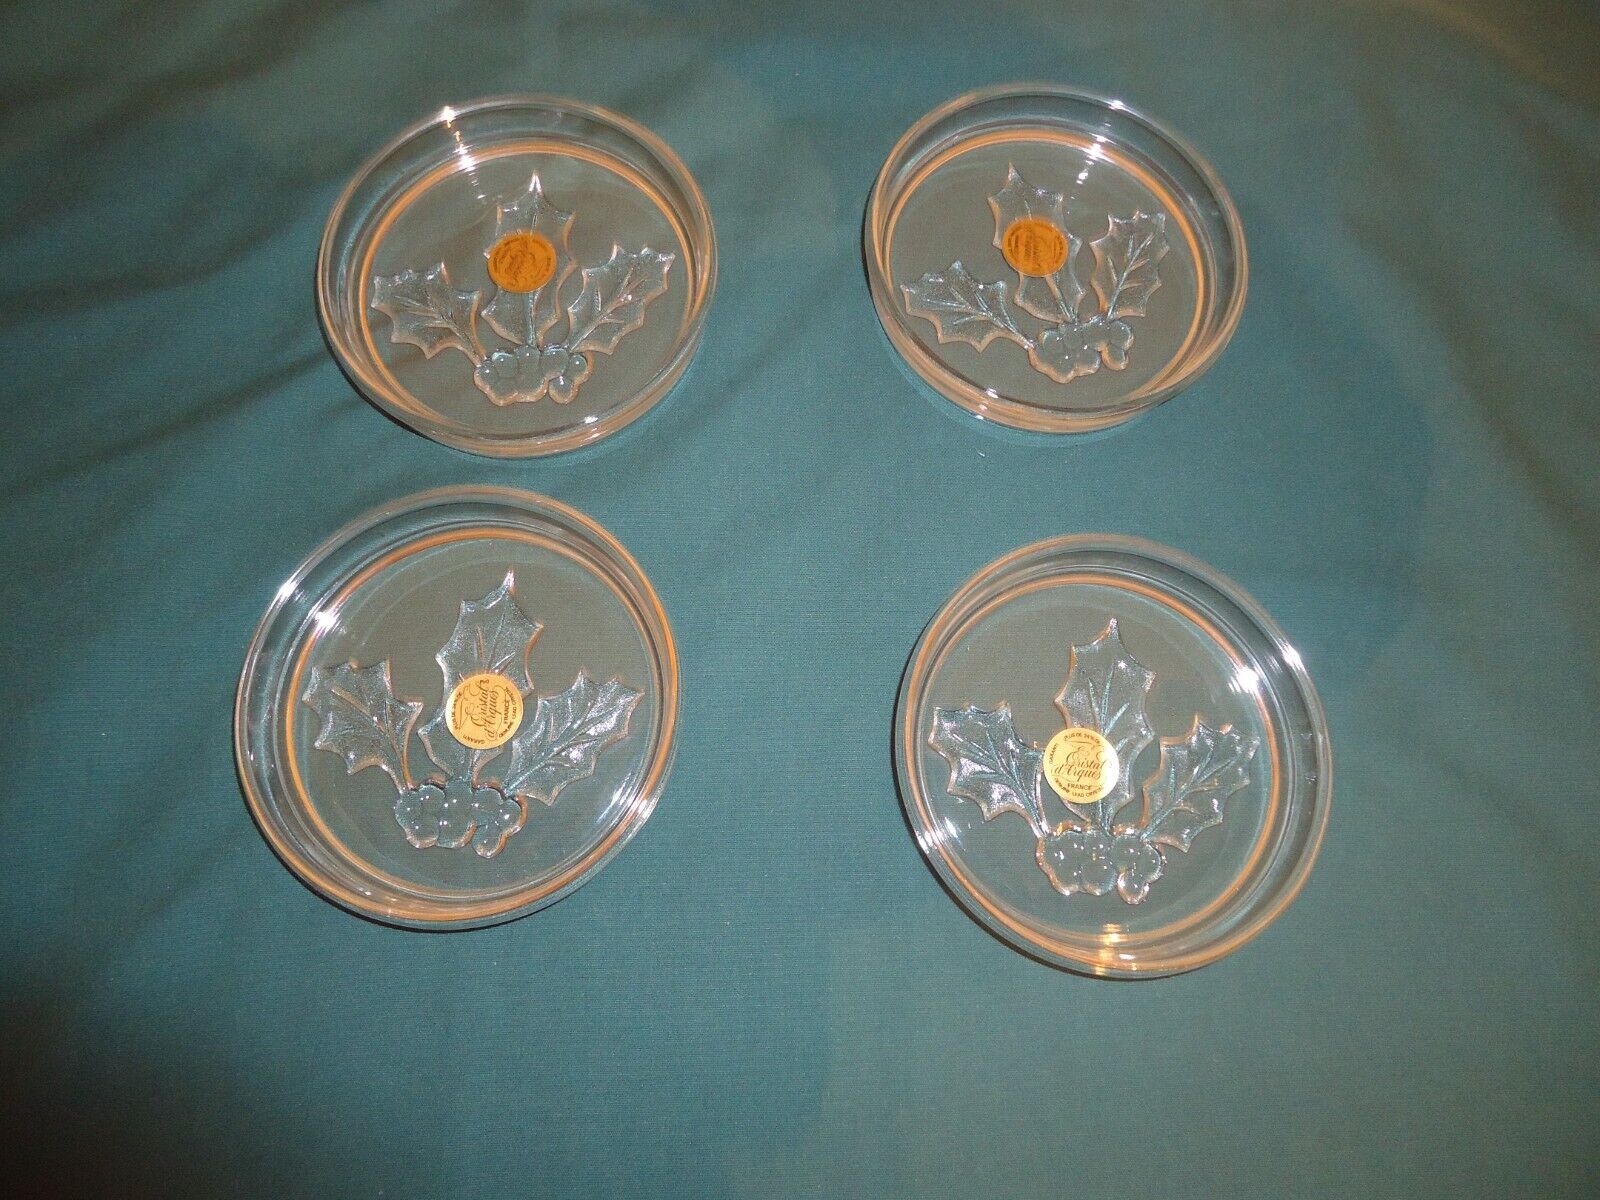 4 NEW Cristal d\'Arques 24% Lead Crystal Coasters Holly & Berries Christmas